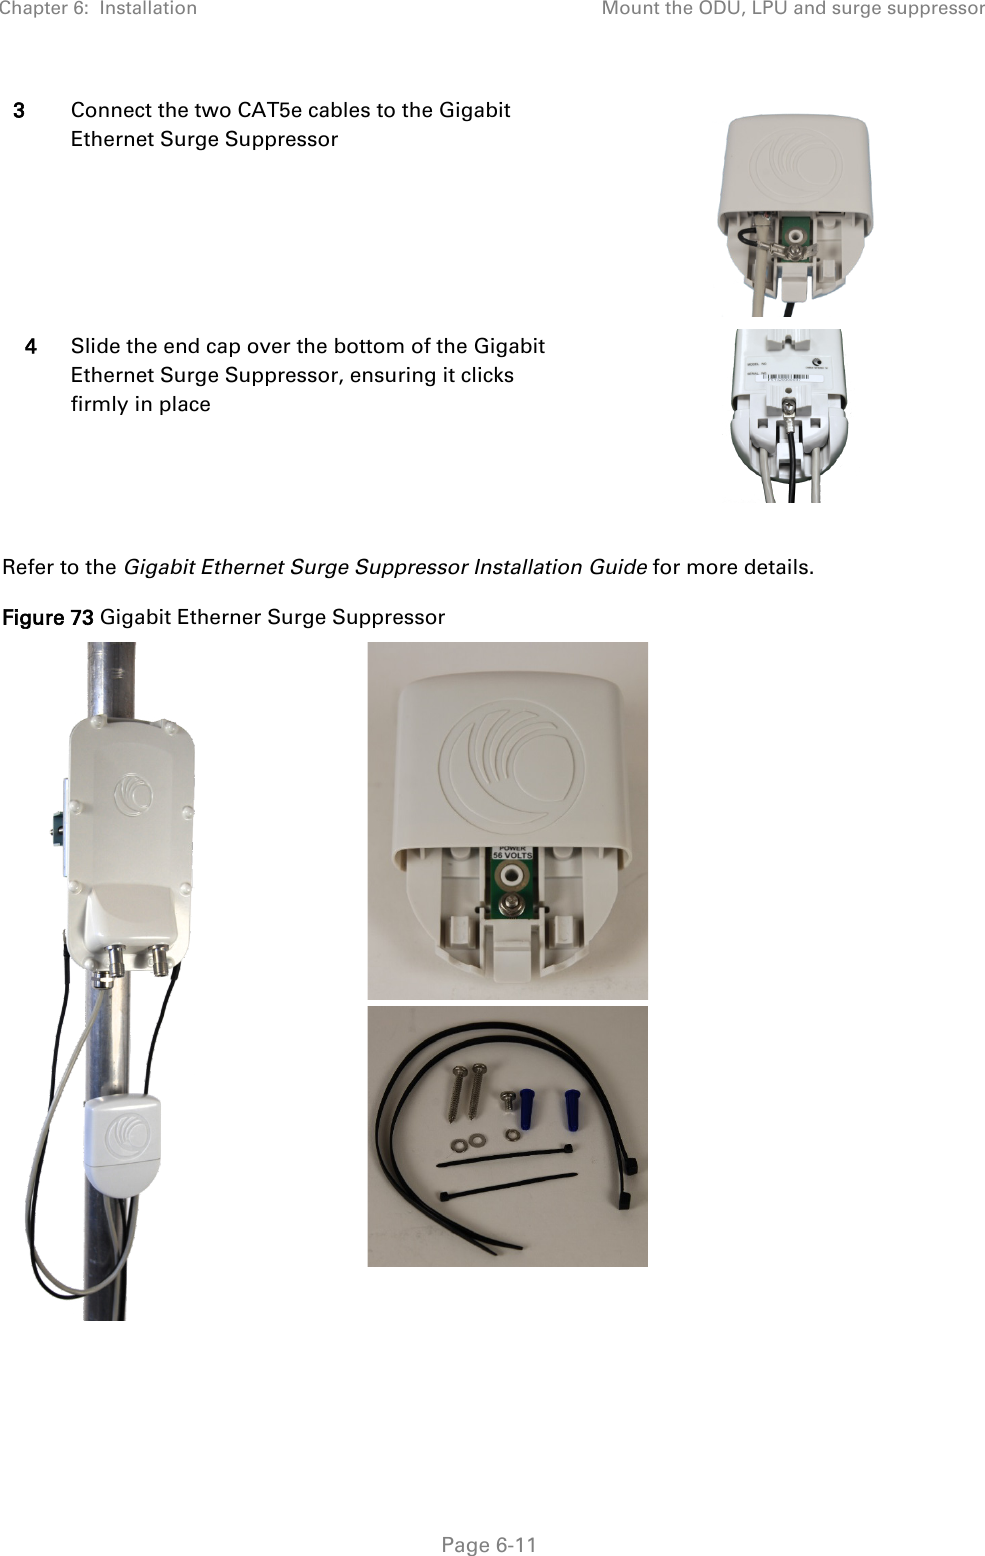 Chapter 6:  Installation Mount the ODU, LPU and surge suppressor   Page 6-11 3 Connect the two CAT5e cables to the Gigabit Ethernet Surge Suppressor  4 Slide the end cap over the bottom of the Gigabit Ethernet Surge Suppressor, ensuring it clicks firmly in place   Refer to the Gigabit Ethernet Surge Suppressor Installation Guide for more details. Figure 73 Gigabit Etherner Surge Suppressor      